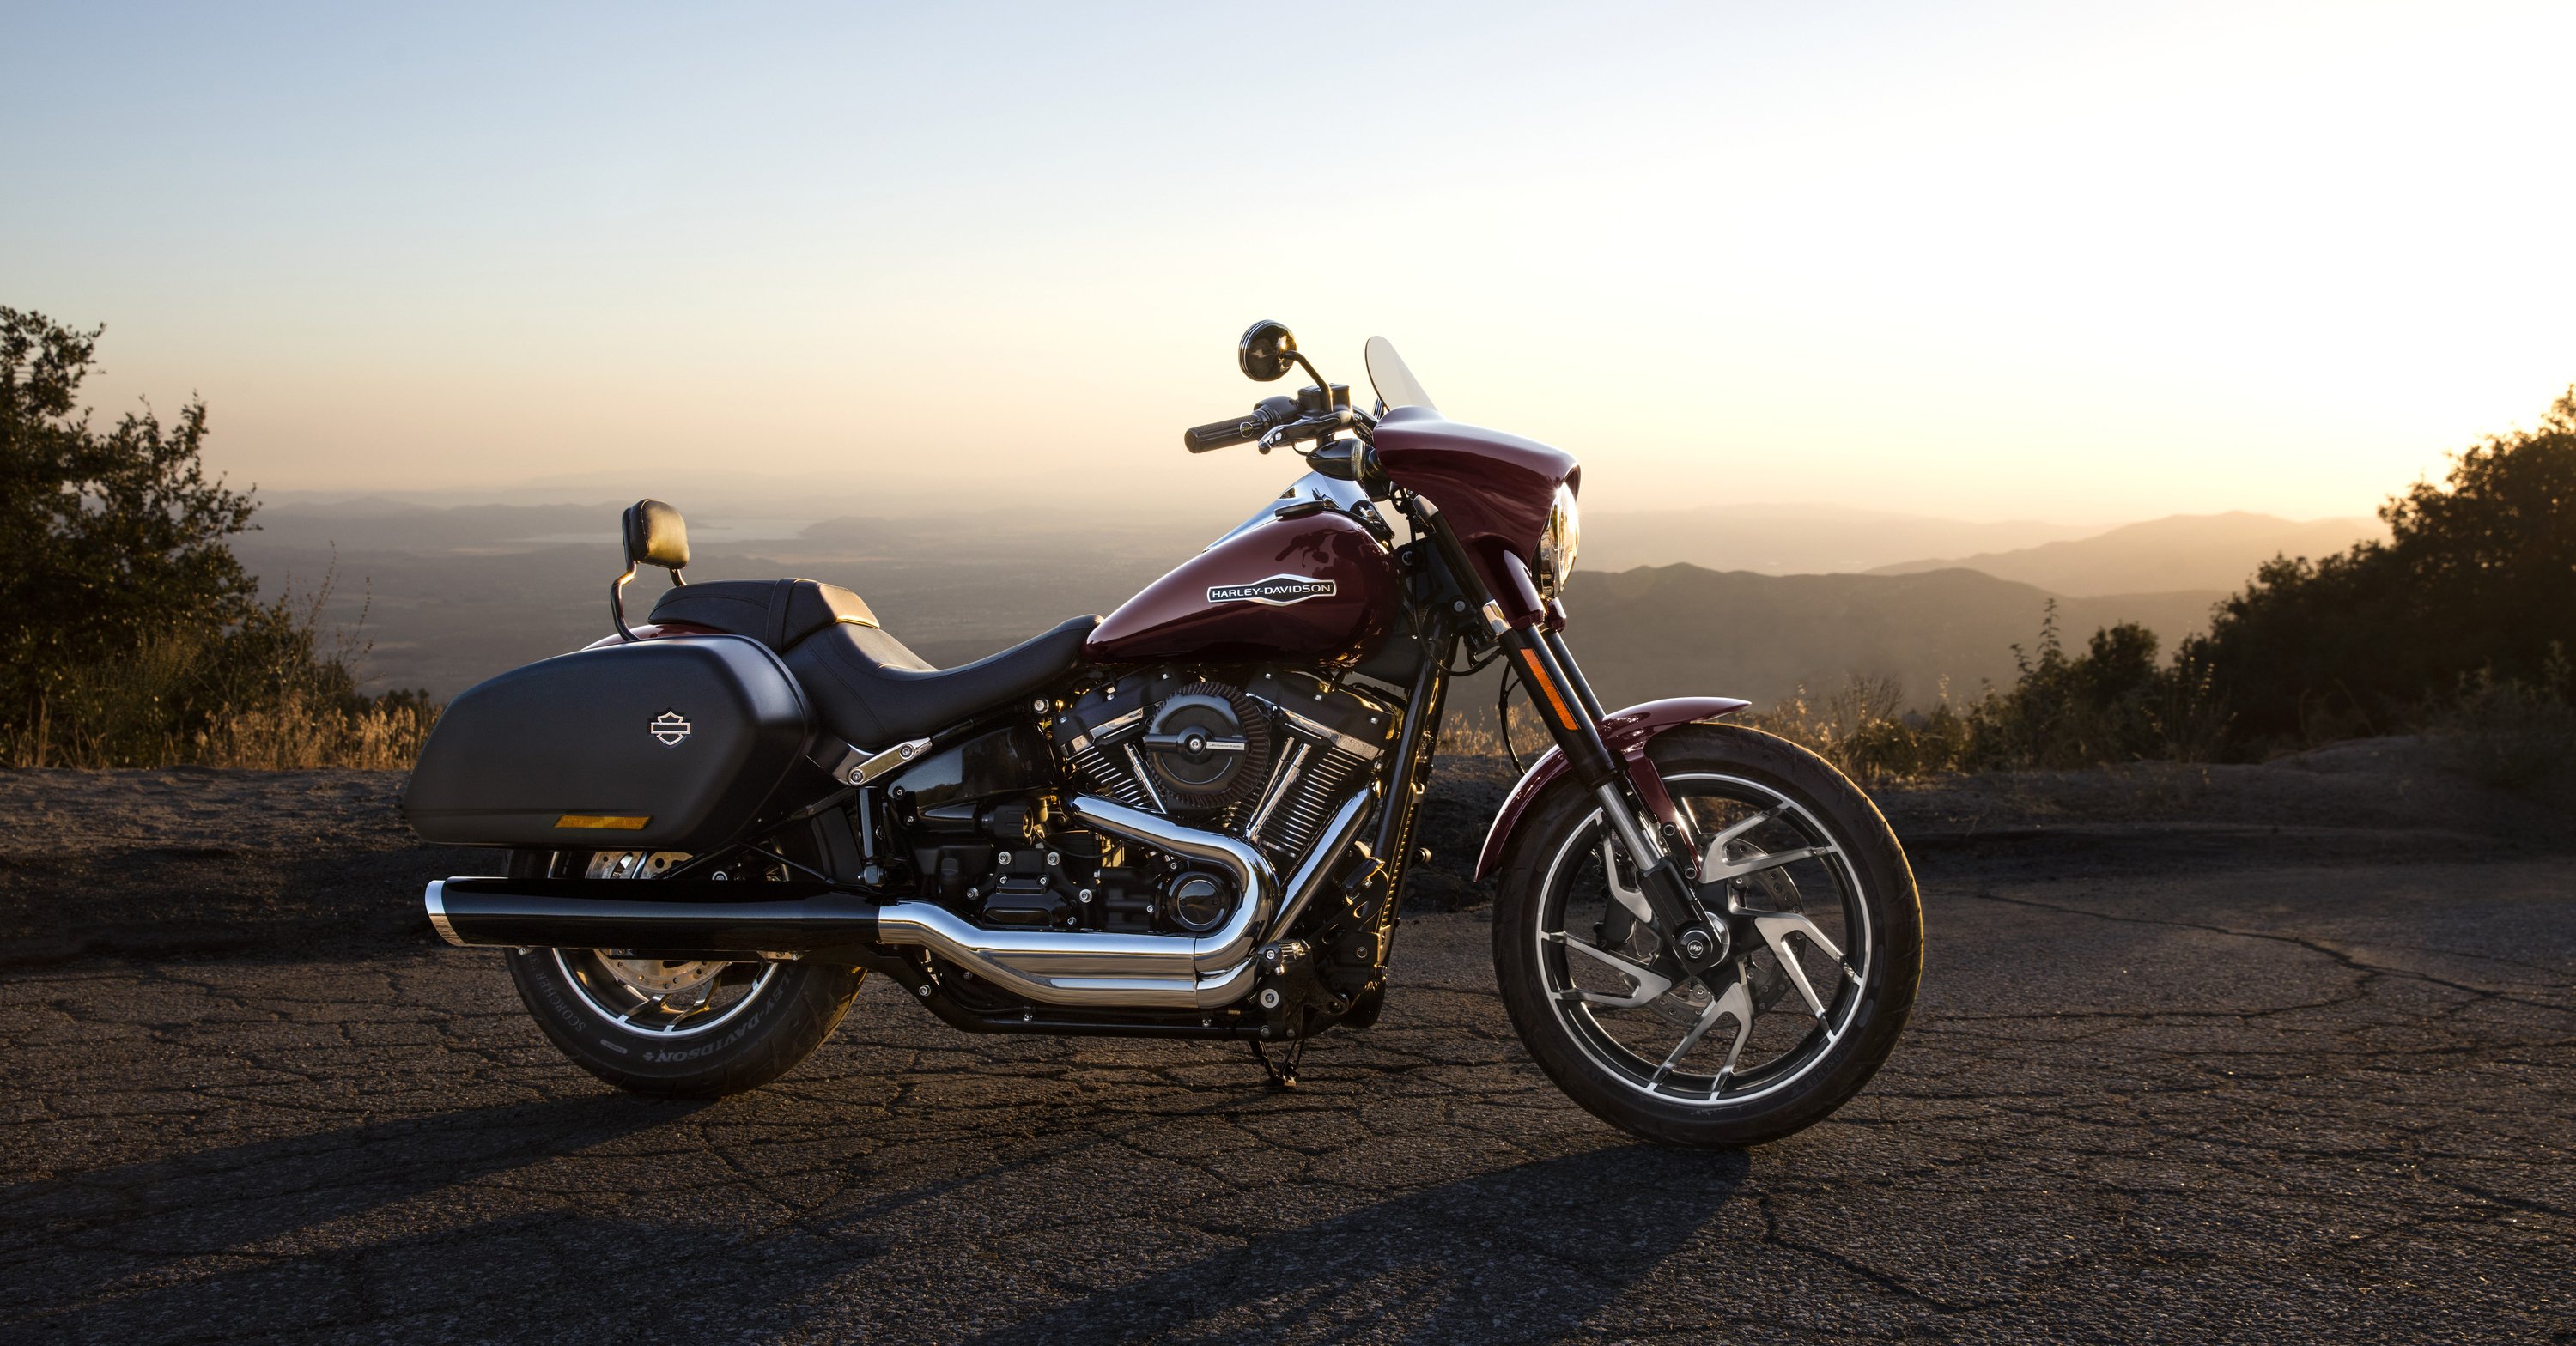 Harley-Davidson a Motor Bike Expo: nuove Softail e Battle of the Kings